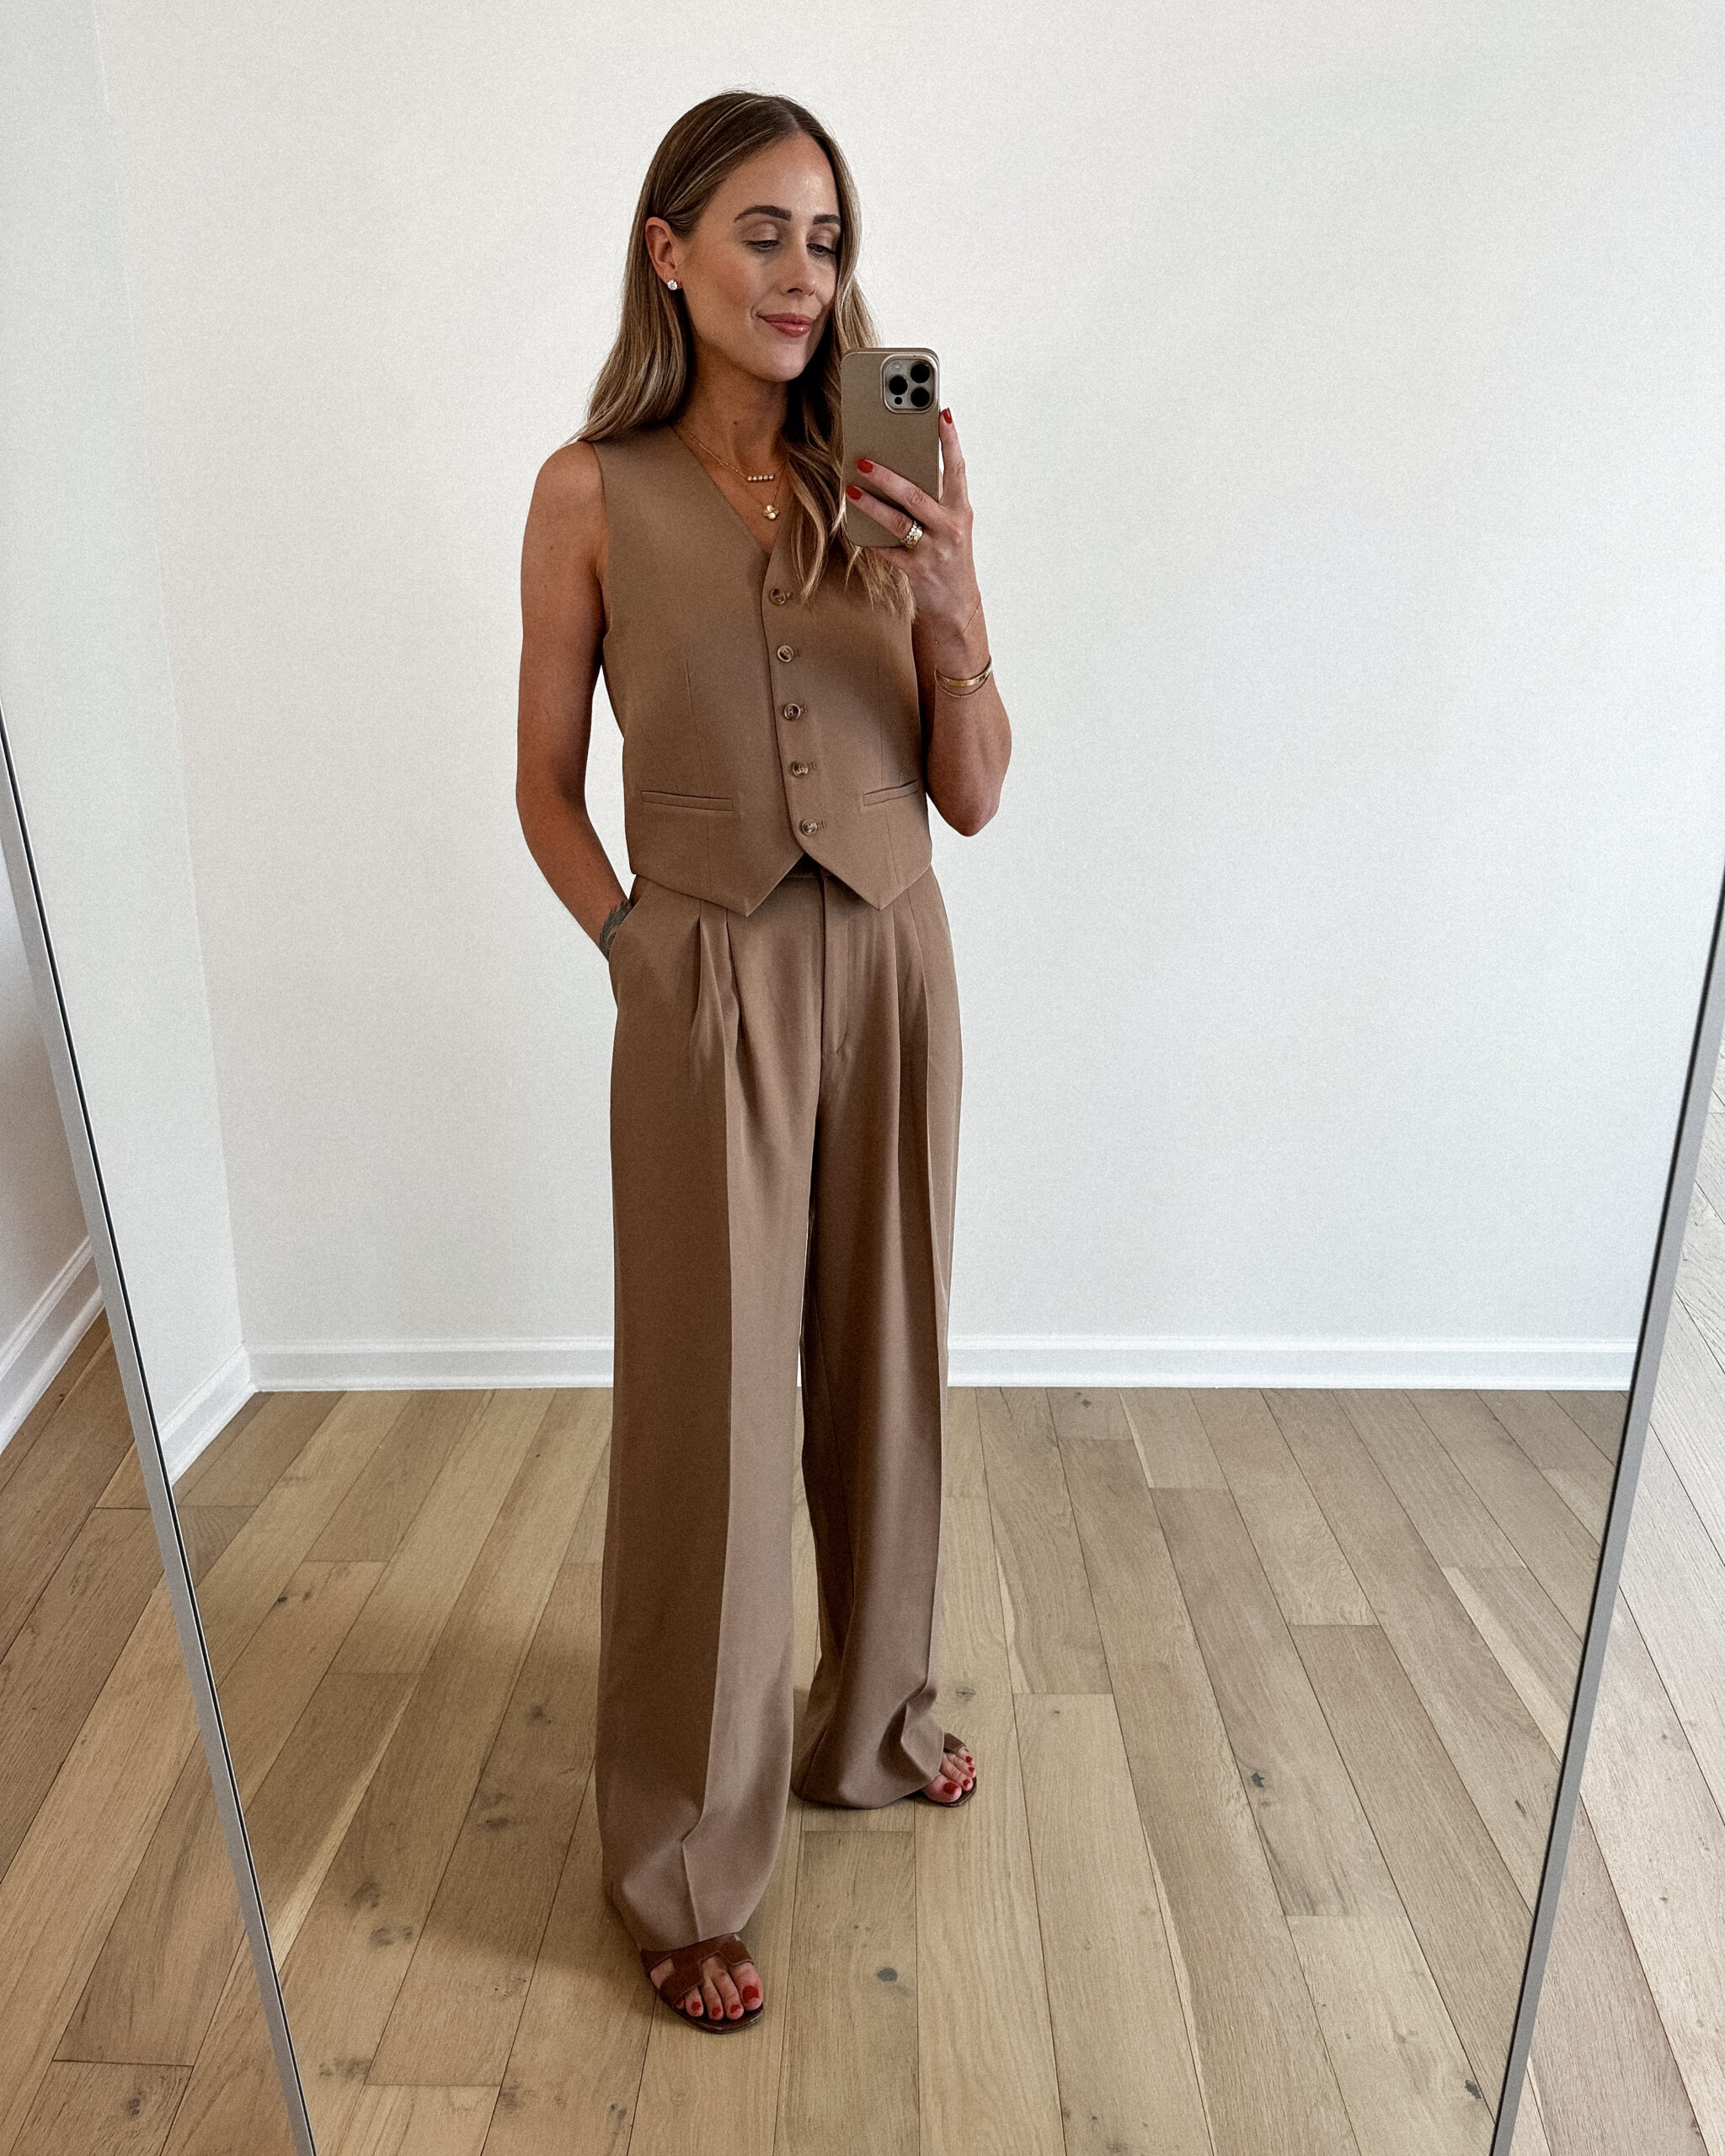 Fashion Jackson Wearing MAYSON the label camel vest, Camel wide leg trousers, Hermes Oran Gold Sandals, Business casual workwear outfit idea